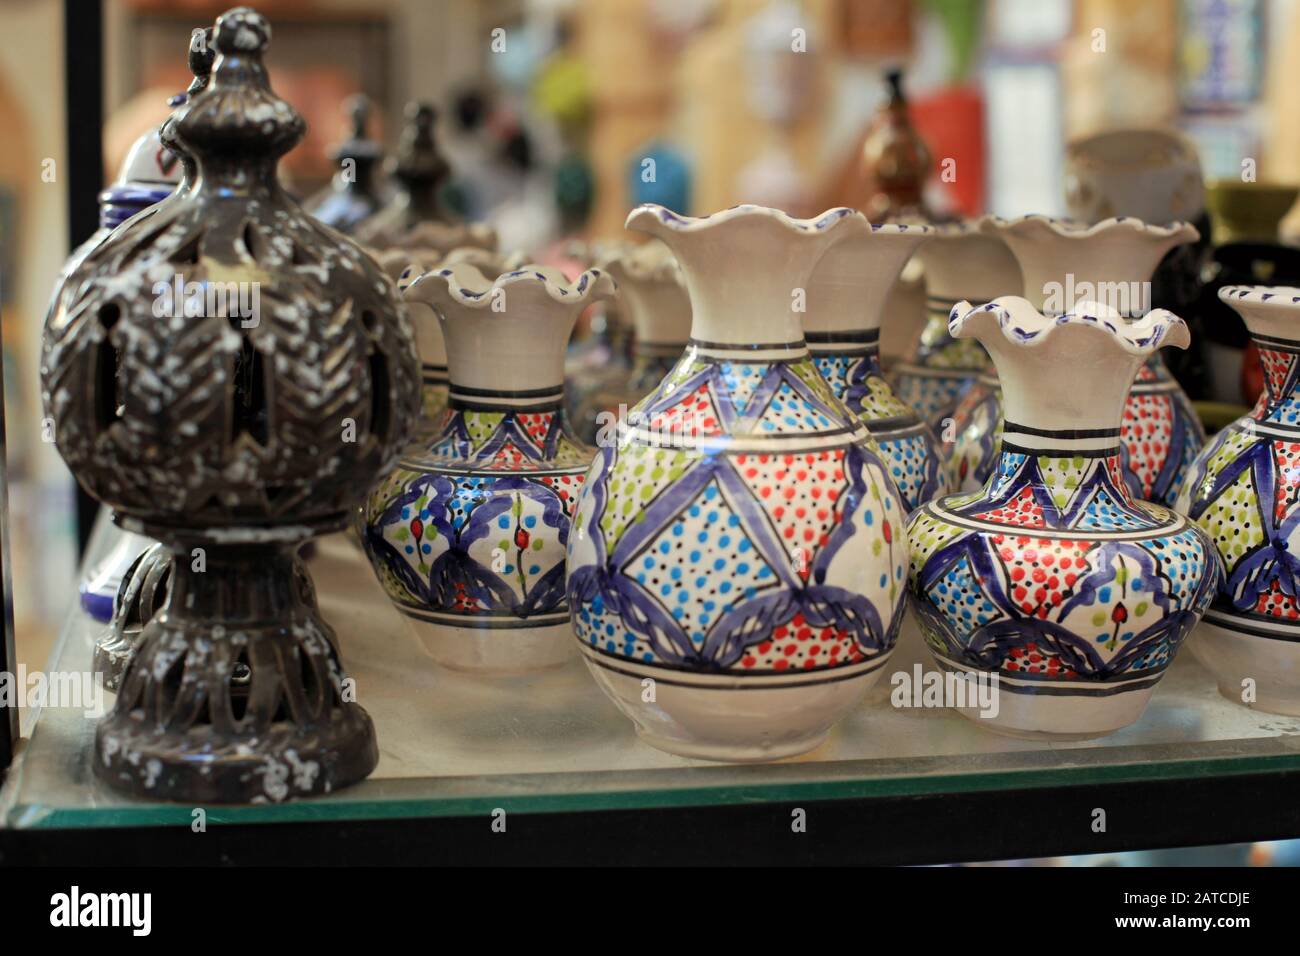 Tarditional vases and lamps for sale in Medina Stock Photo